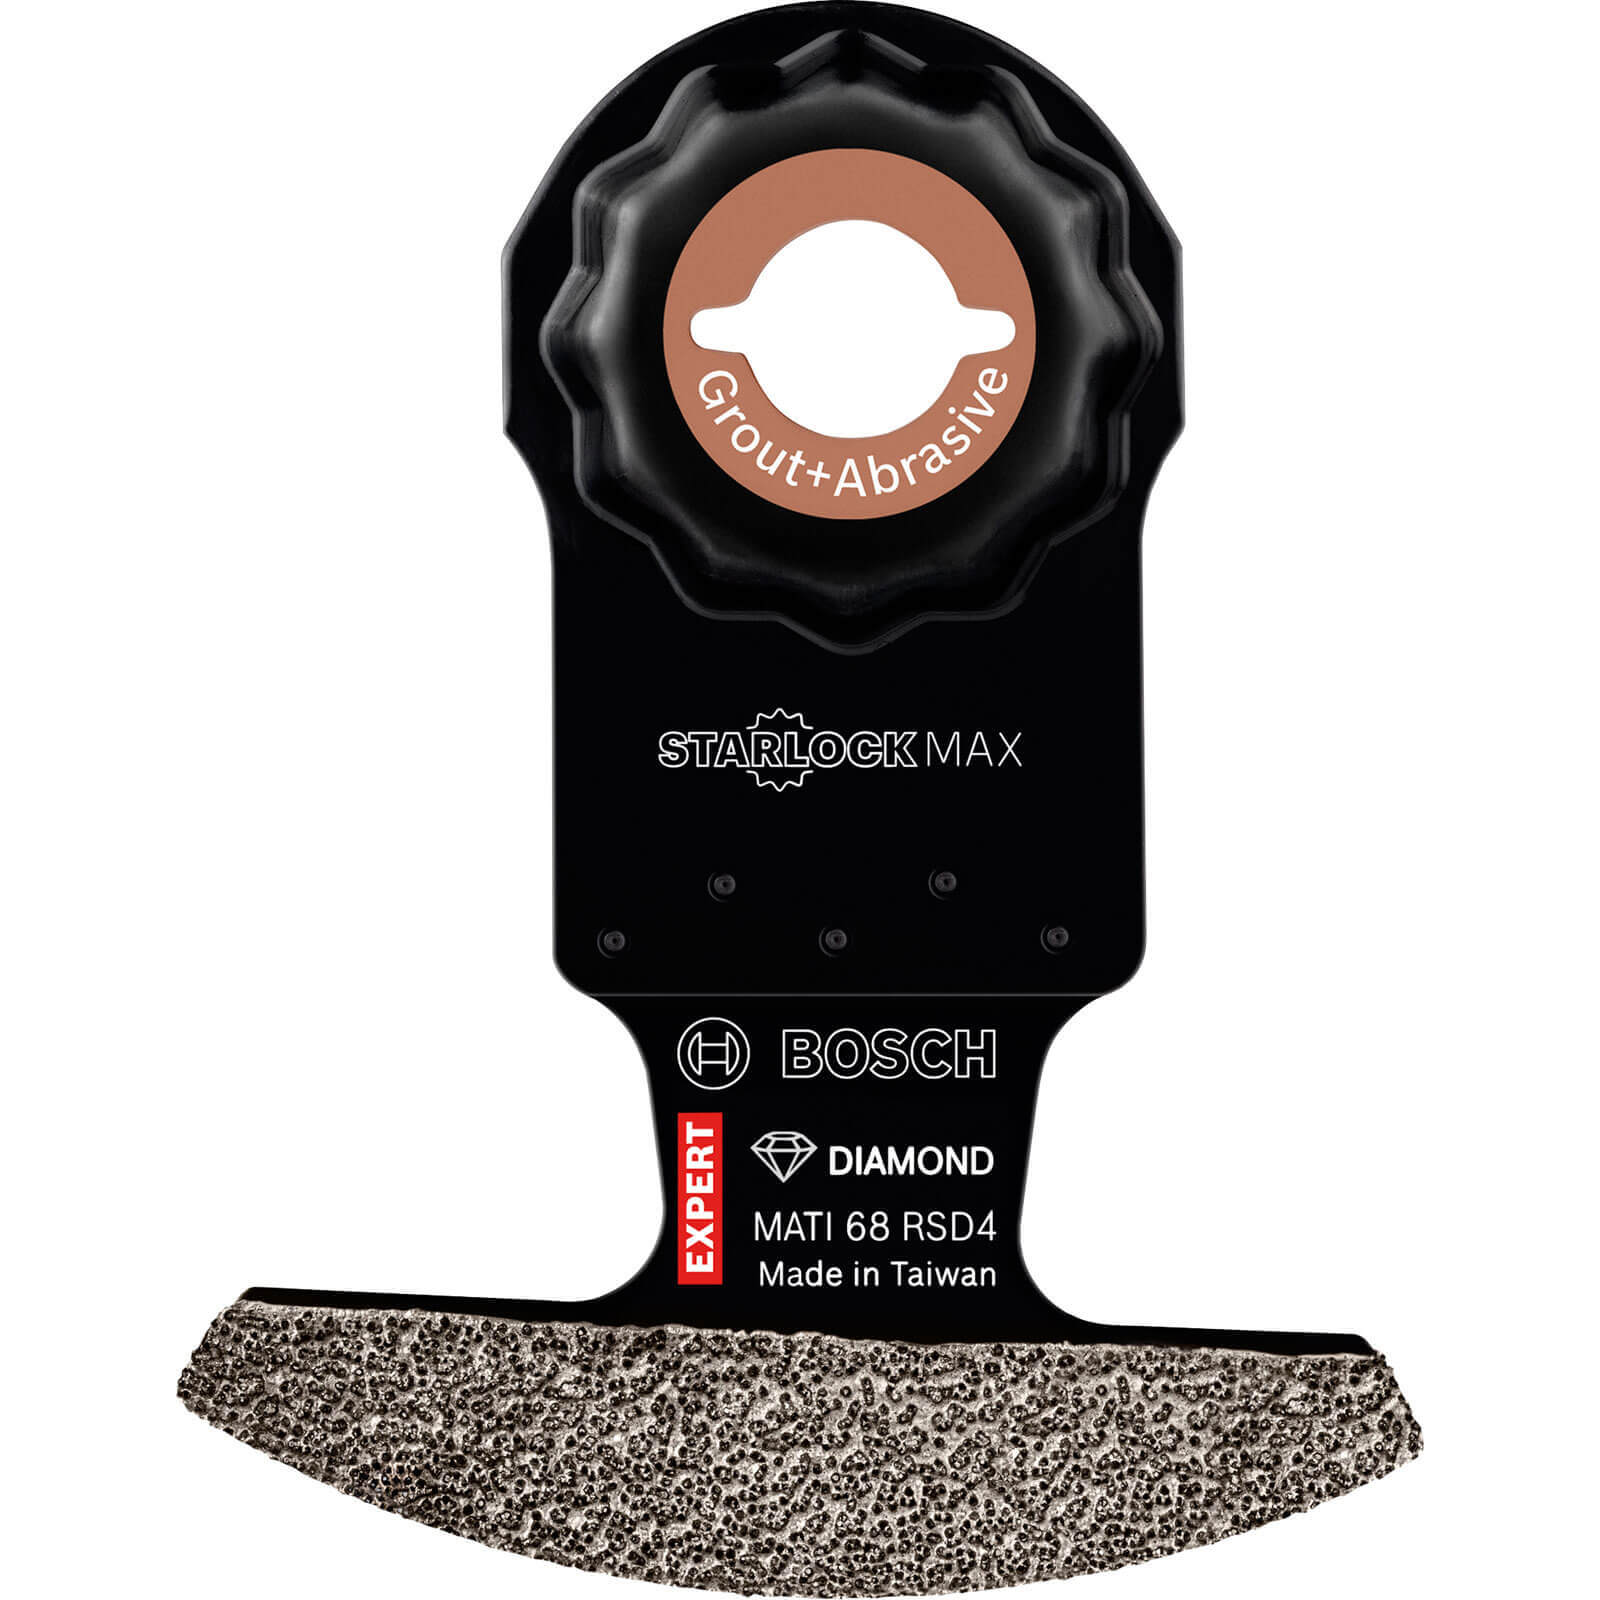 Image of Bosch Expert MATI 68 RSD4 Abrasive and Grout Starlock Max Oscillating Multi Tool Segment Saw Blade 68mm Pack of 1